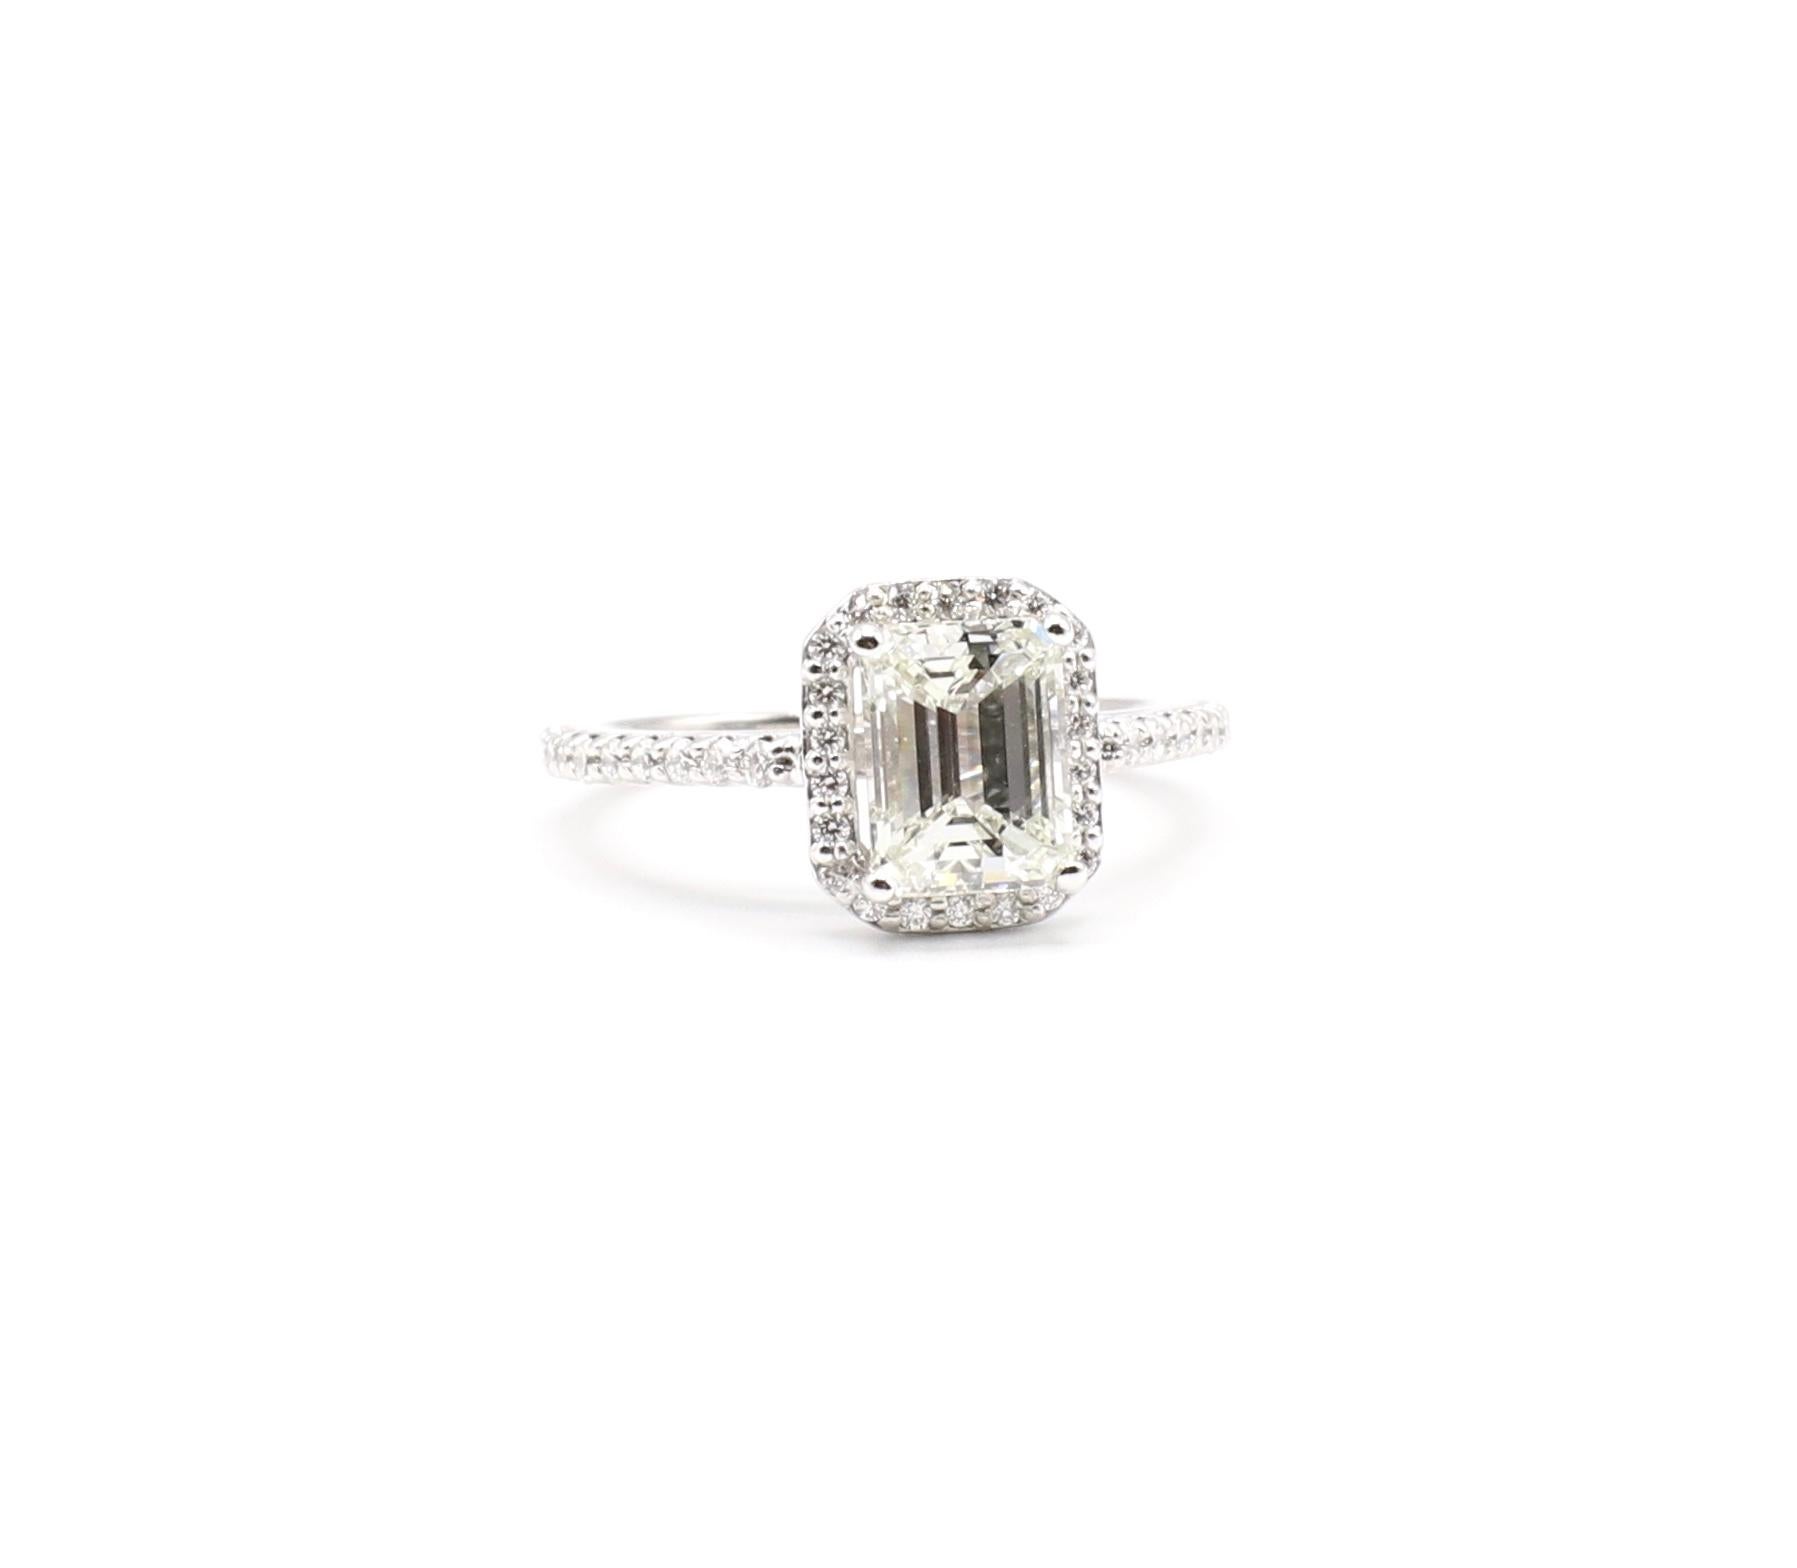 GIA Certified Emerald Cut 1.55ct J VS2 Diamond Halo Engagement Ring 14K Size 4.75

GIA Report Number: 1249330412 (see picture of report for details. Note this is a report copy). 
Diamond shape: Emerald Cut
Carat weight: 1.55 cts
Color: J
Clarity: